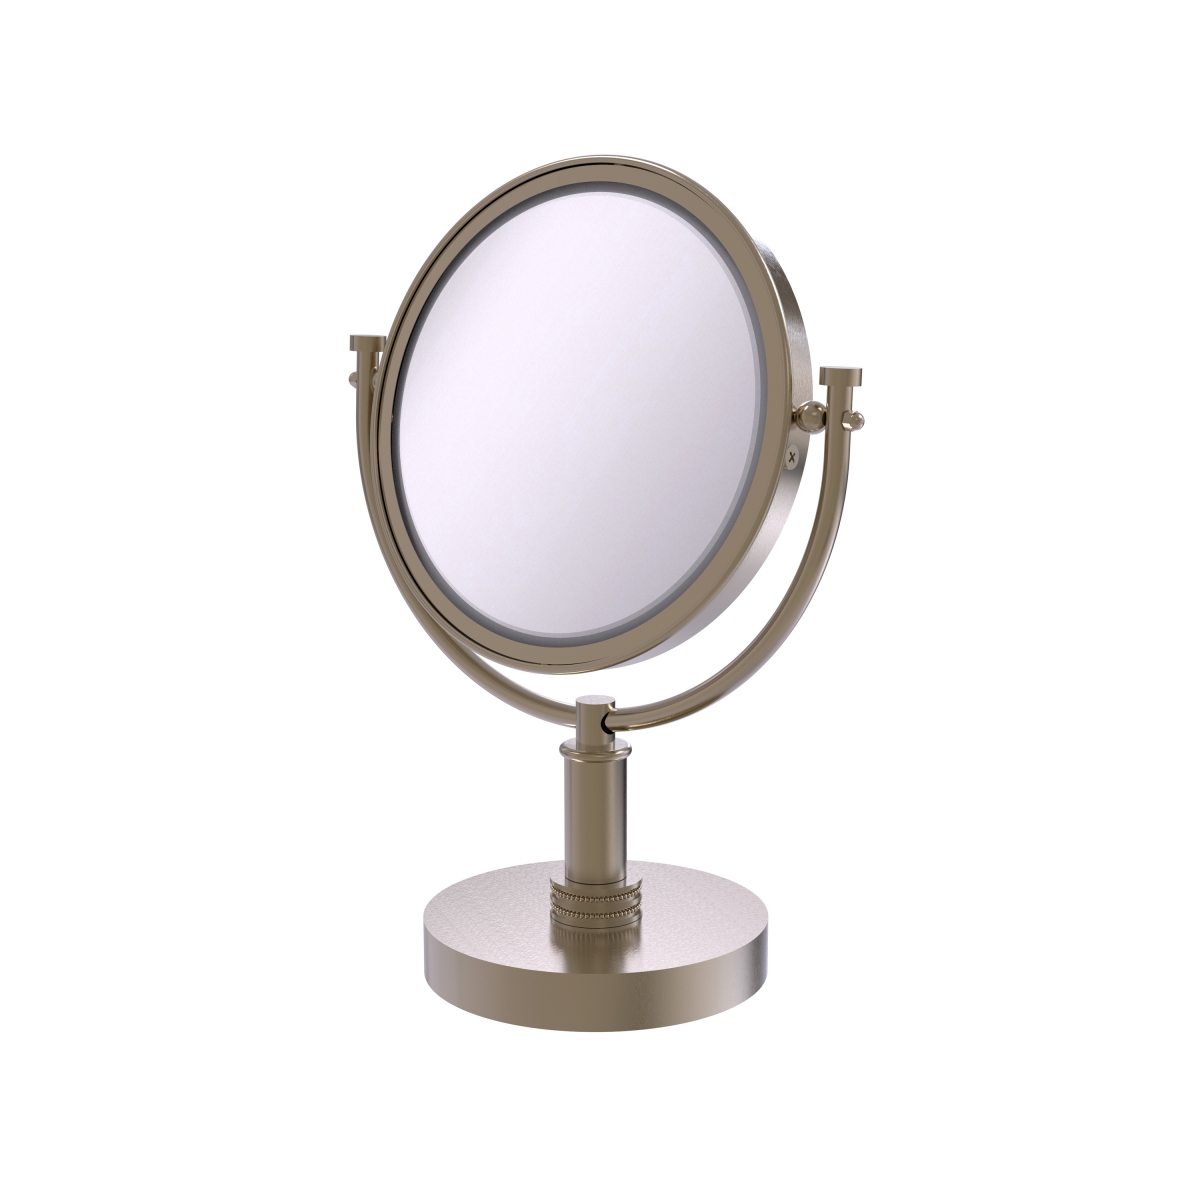 Picture of Allied Brass DM-4D-3X-PEW 8 in. Vanity Top Make-Up Mirror 3X Magnification, Antique Pewter - 15 x 8 x 8 in.